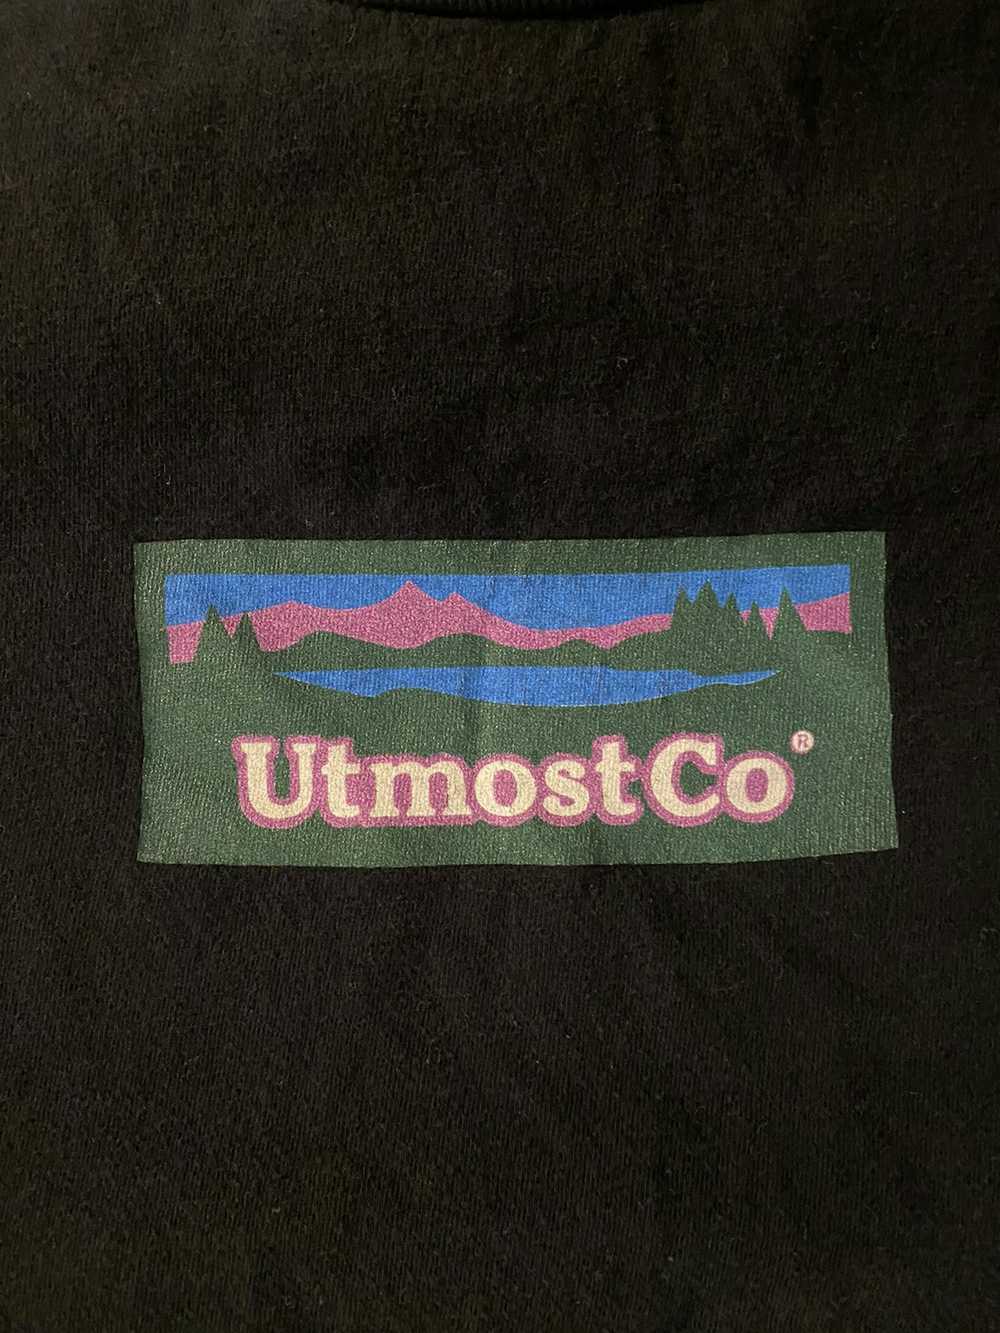 Utmost Co Utmost Co Out Doors Tee - image 2